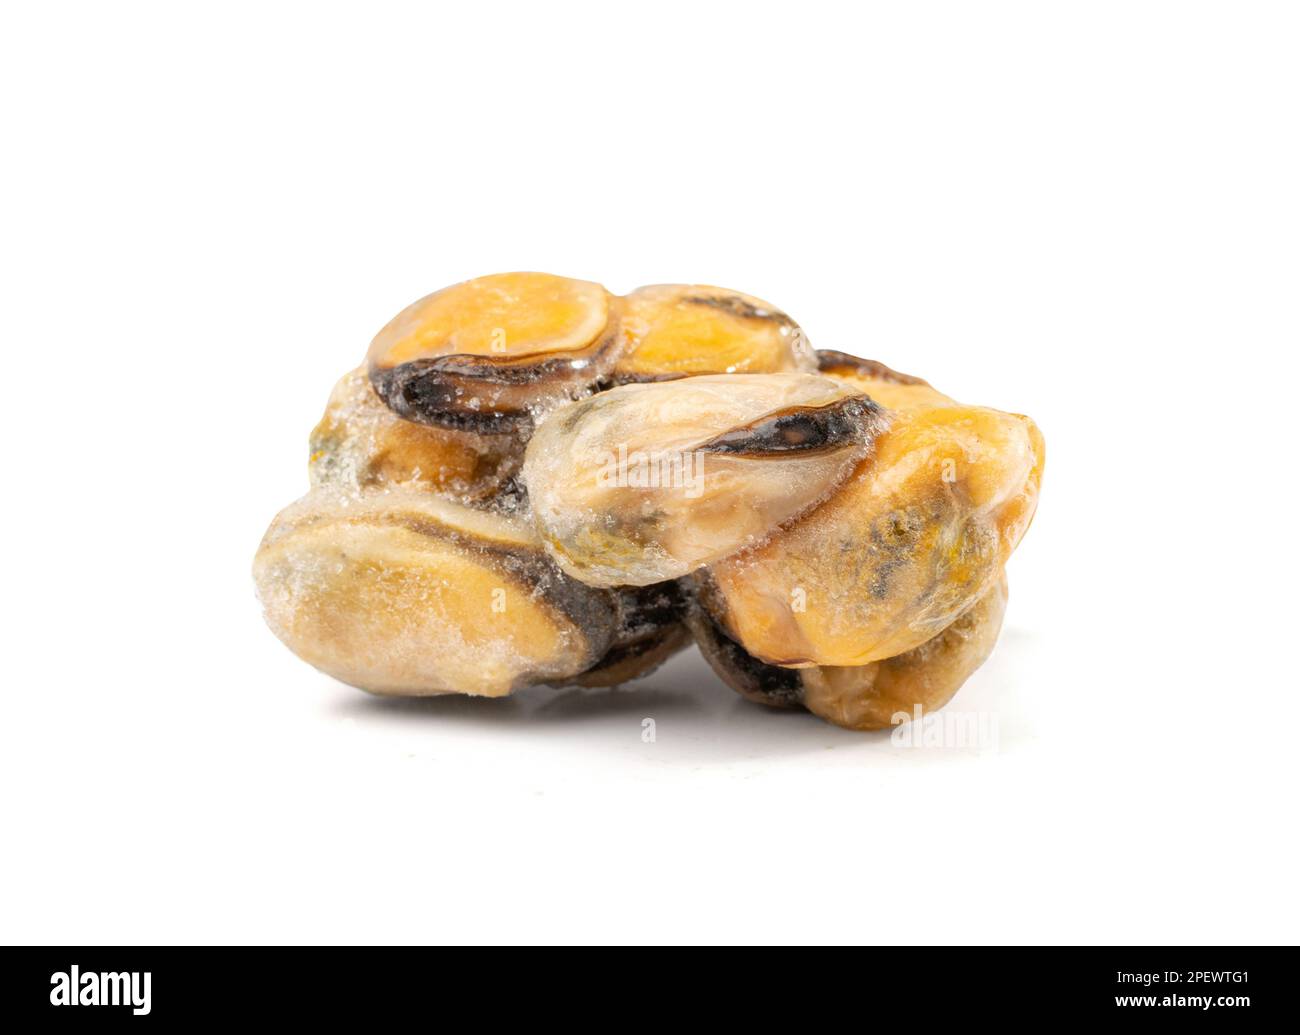 Frozen Mussels Pile Isolated, Unshelled Clam, Frozen Peeled Mussel, Cold Mussels Meat, Iced Seafood, Cooked Shellfish on White Background Stock Photo